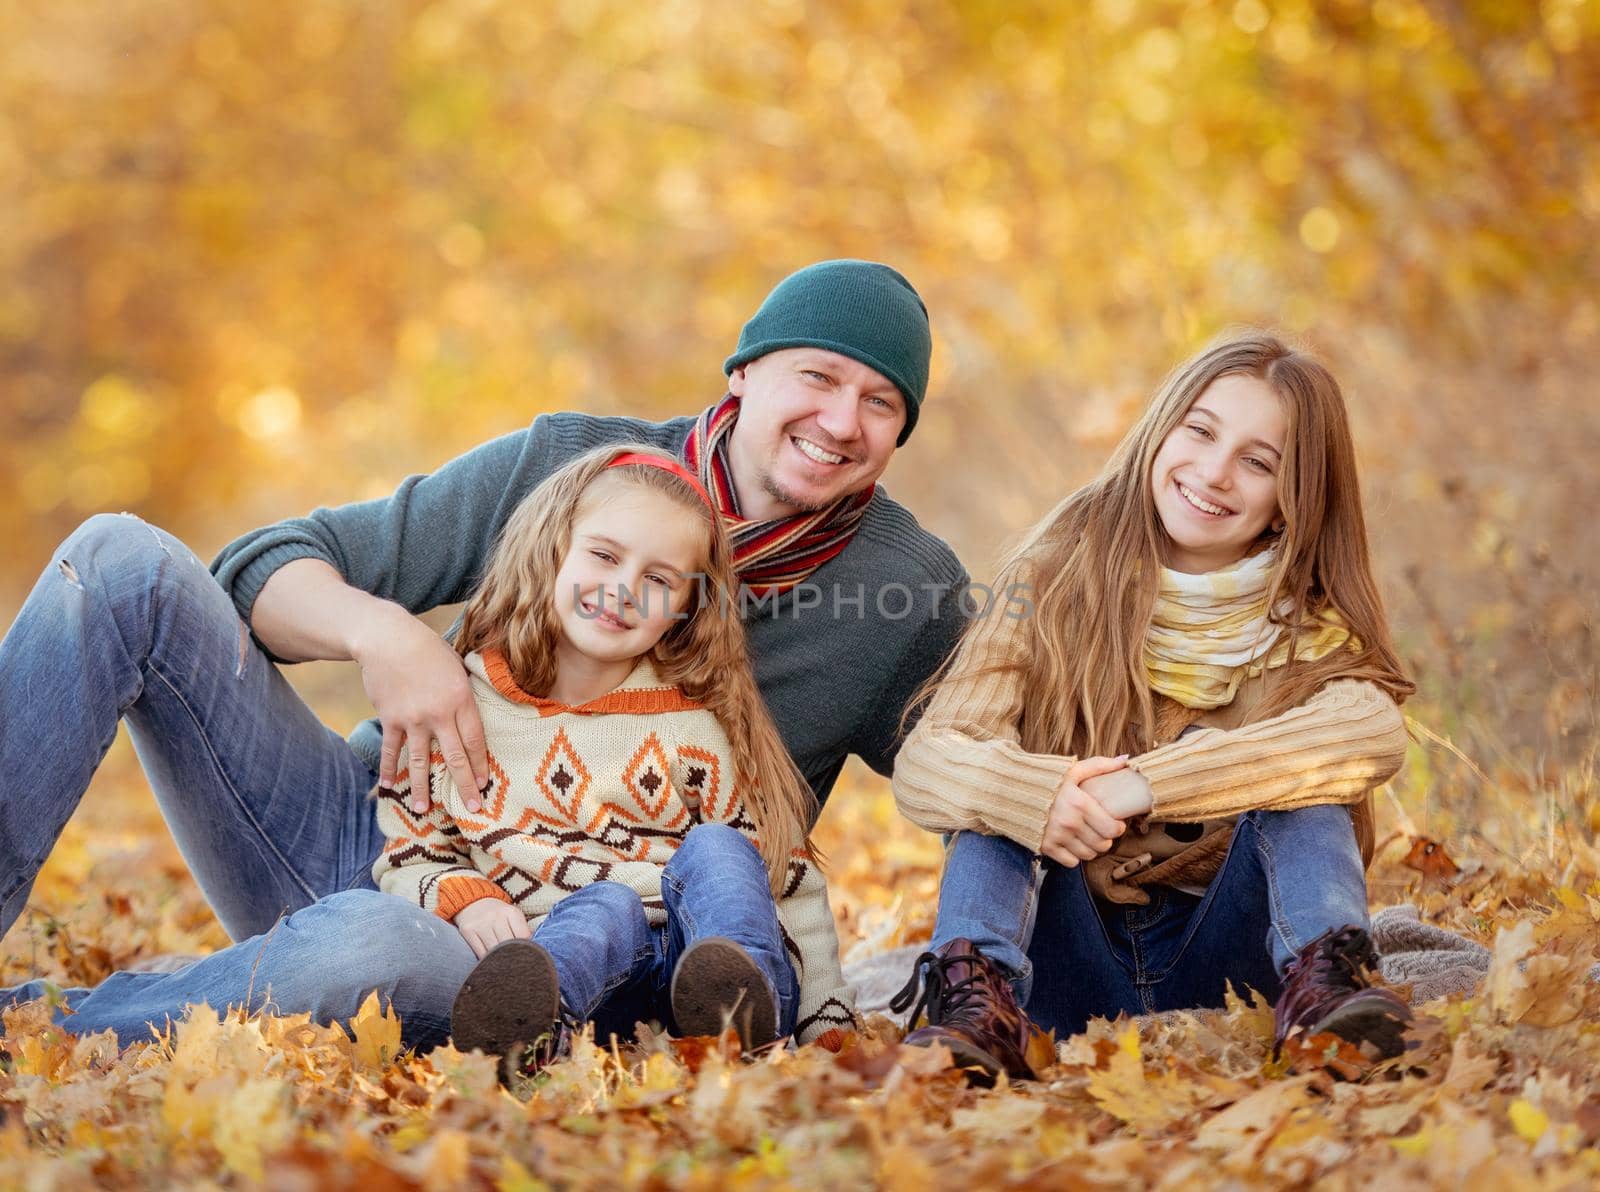 Daughters and father sitting in autumn leaves